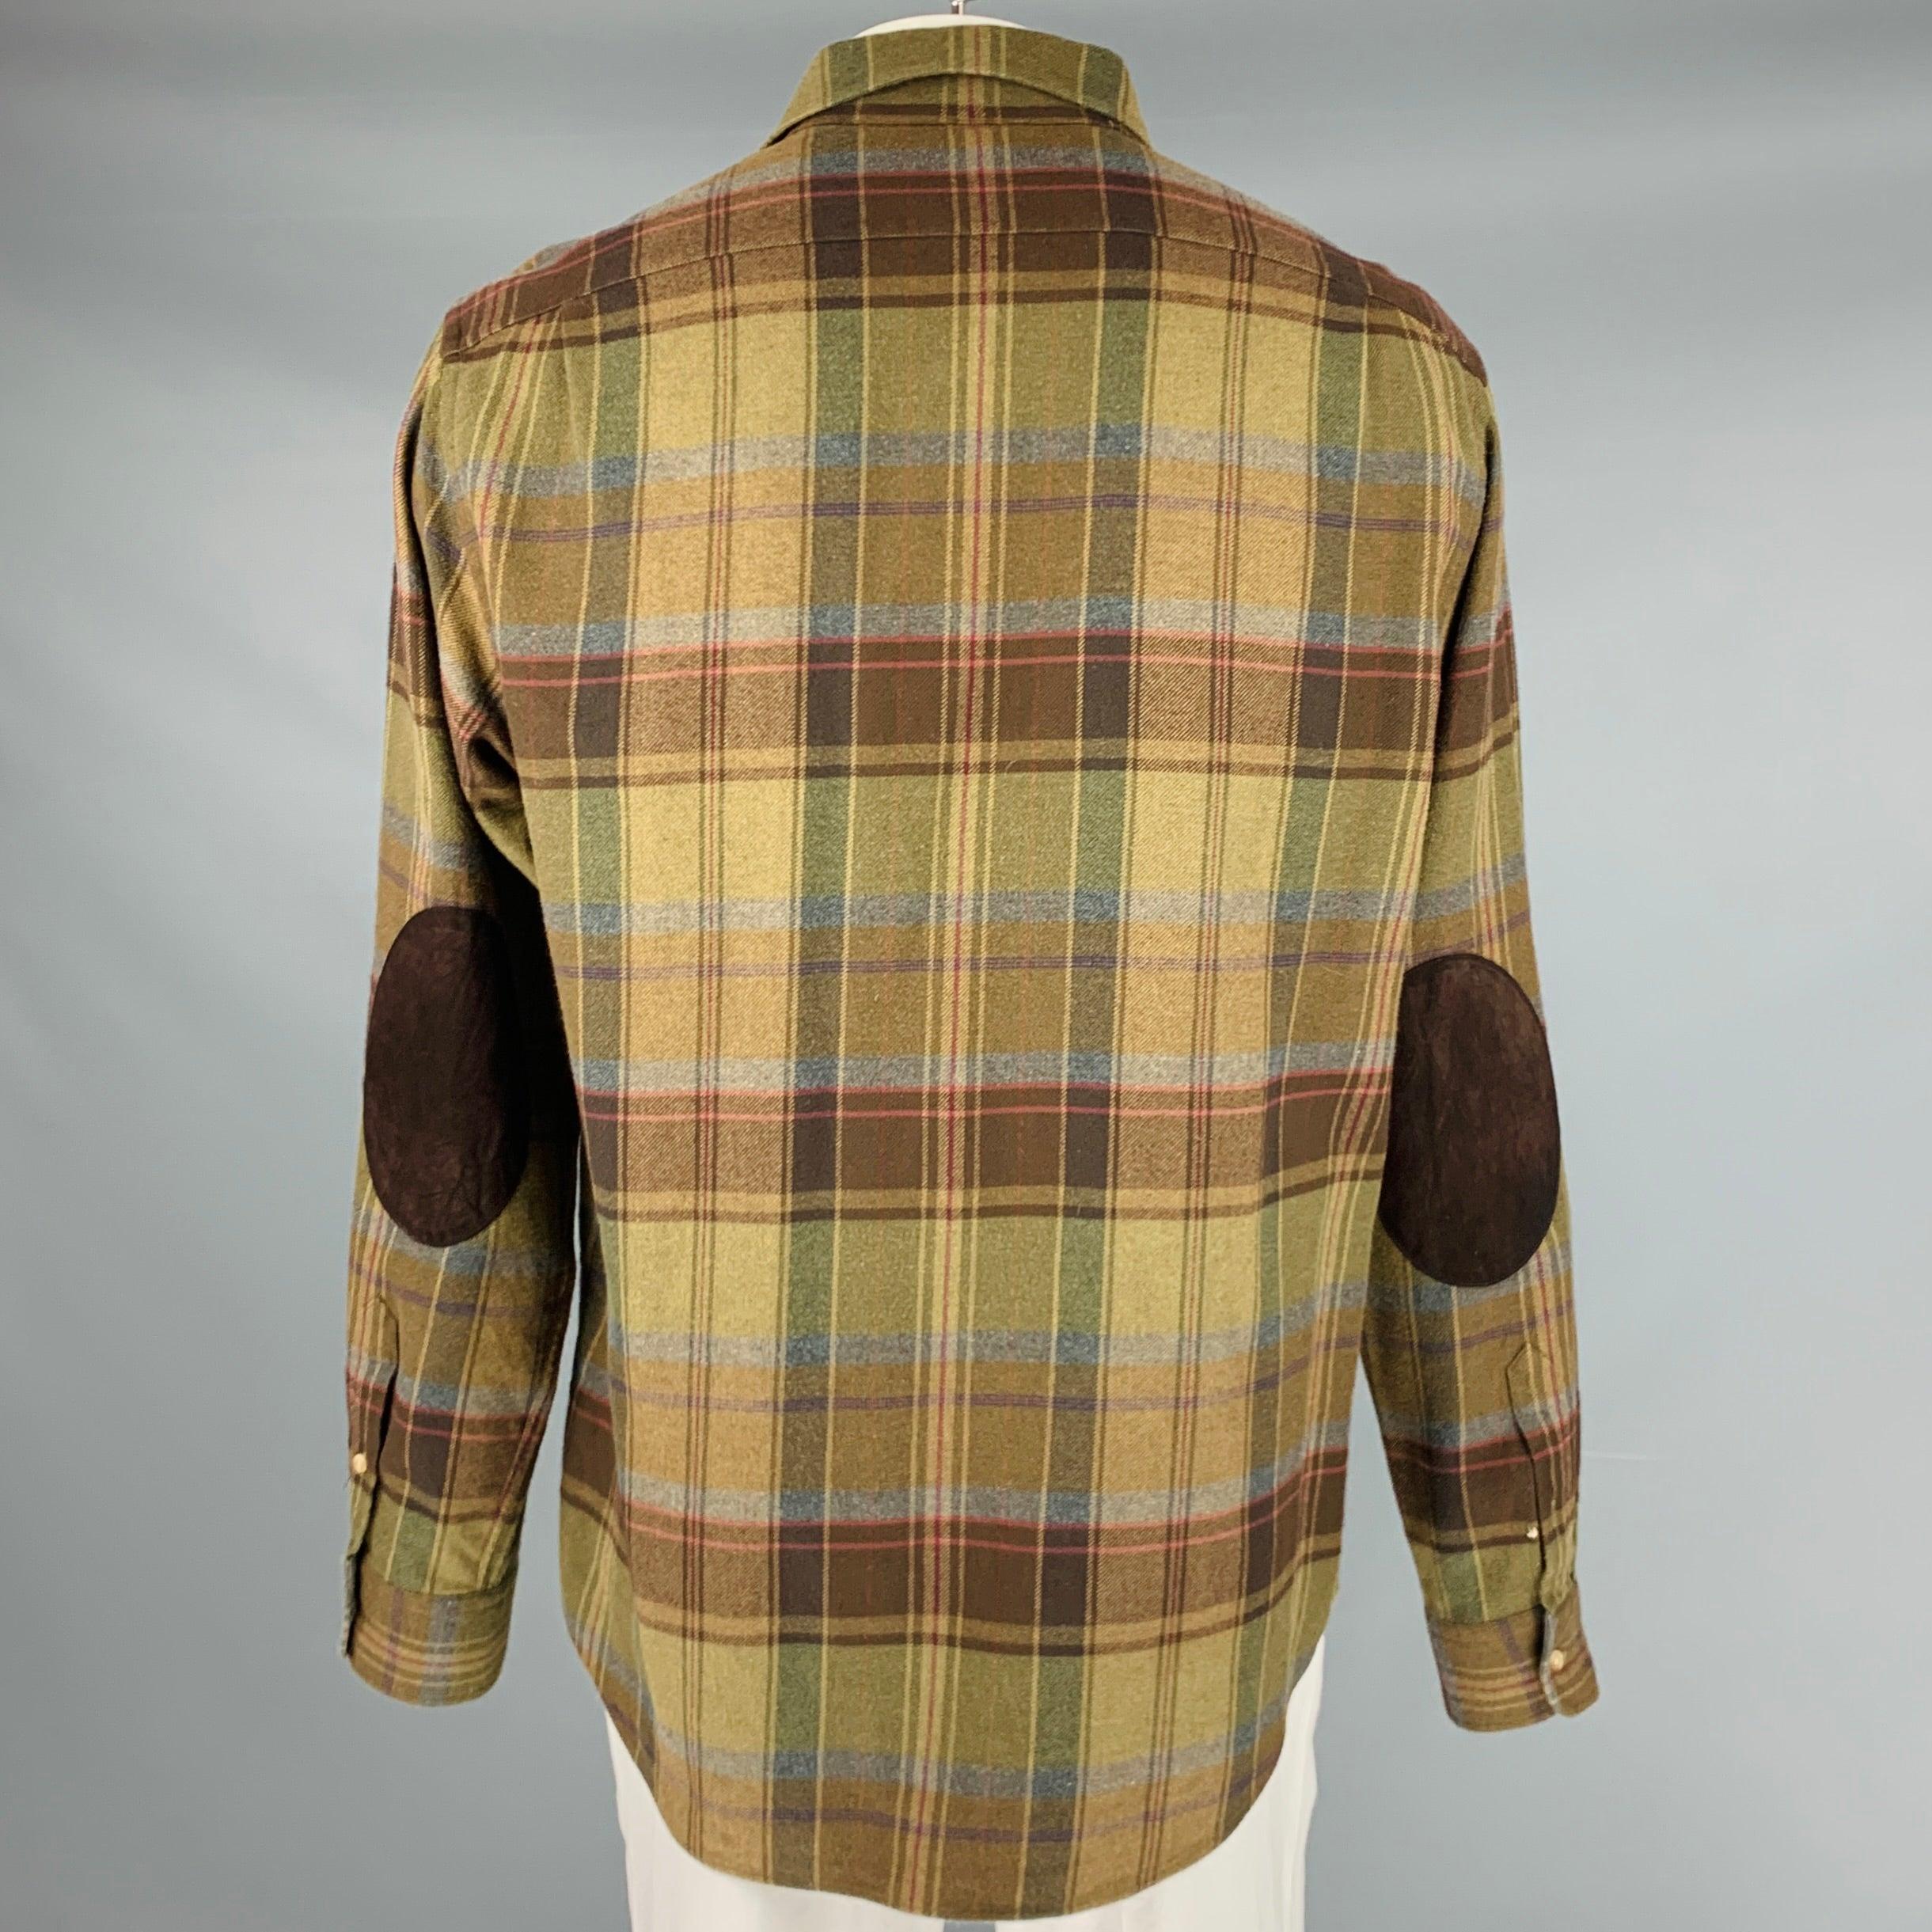 RALPH LAUREN Size XL Brown Green Plaid Cotton Elbow Patches Long Sleeve Shirt In Good Condition For Sale In San Francisco, CA